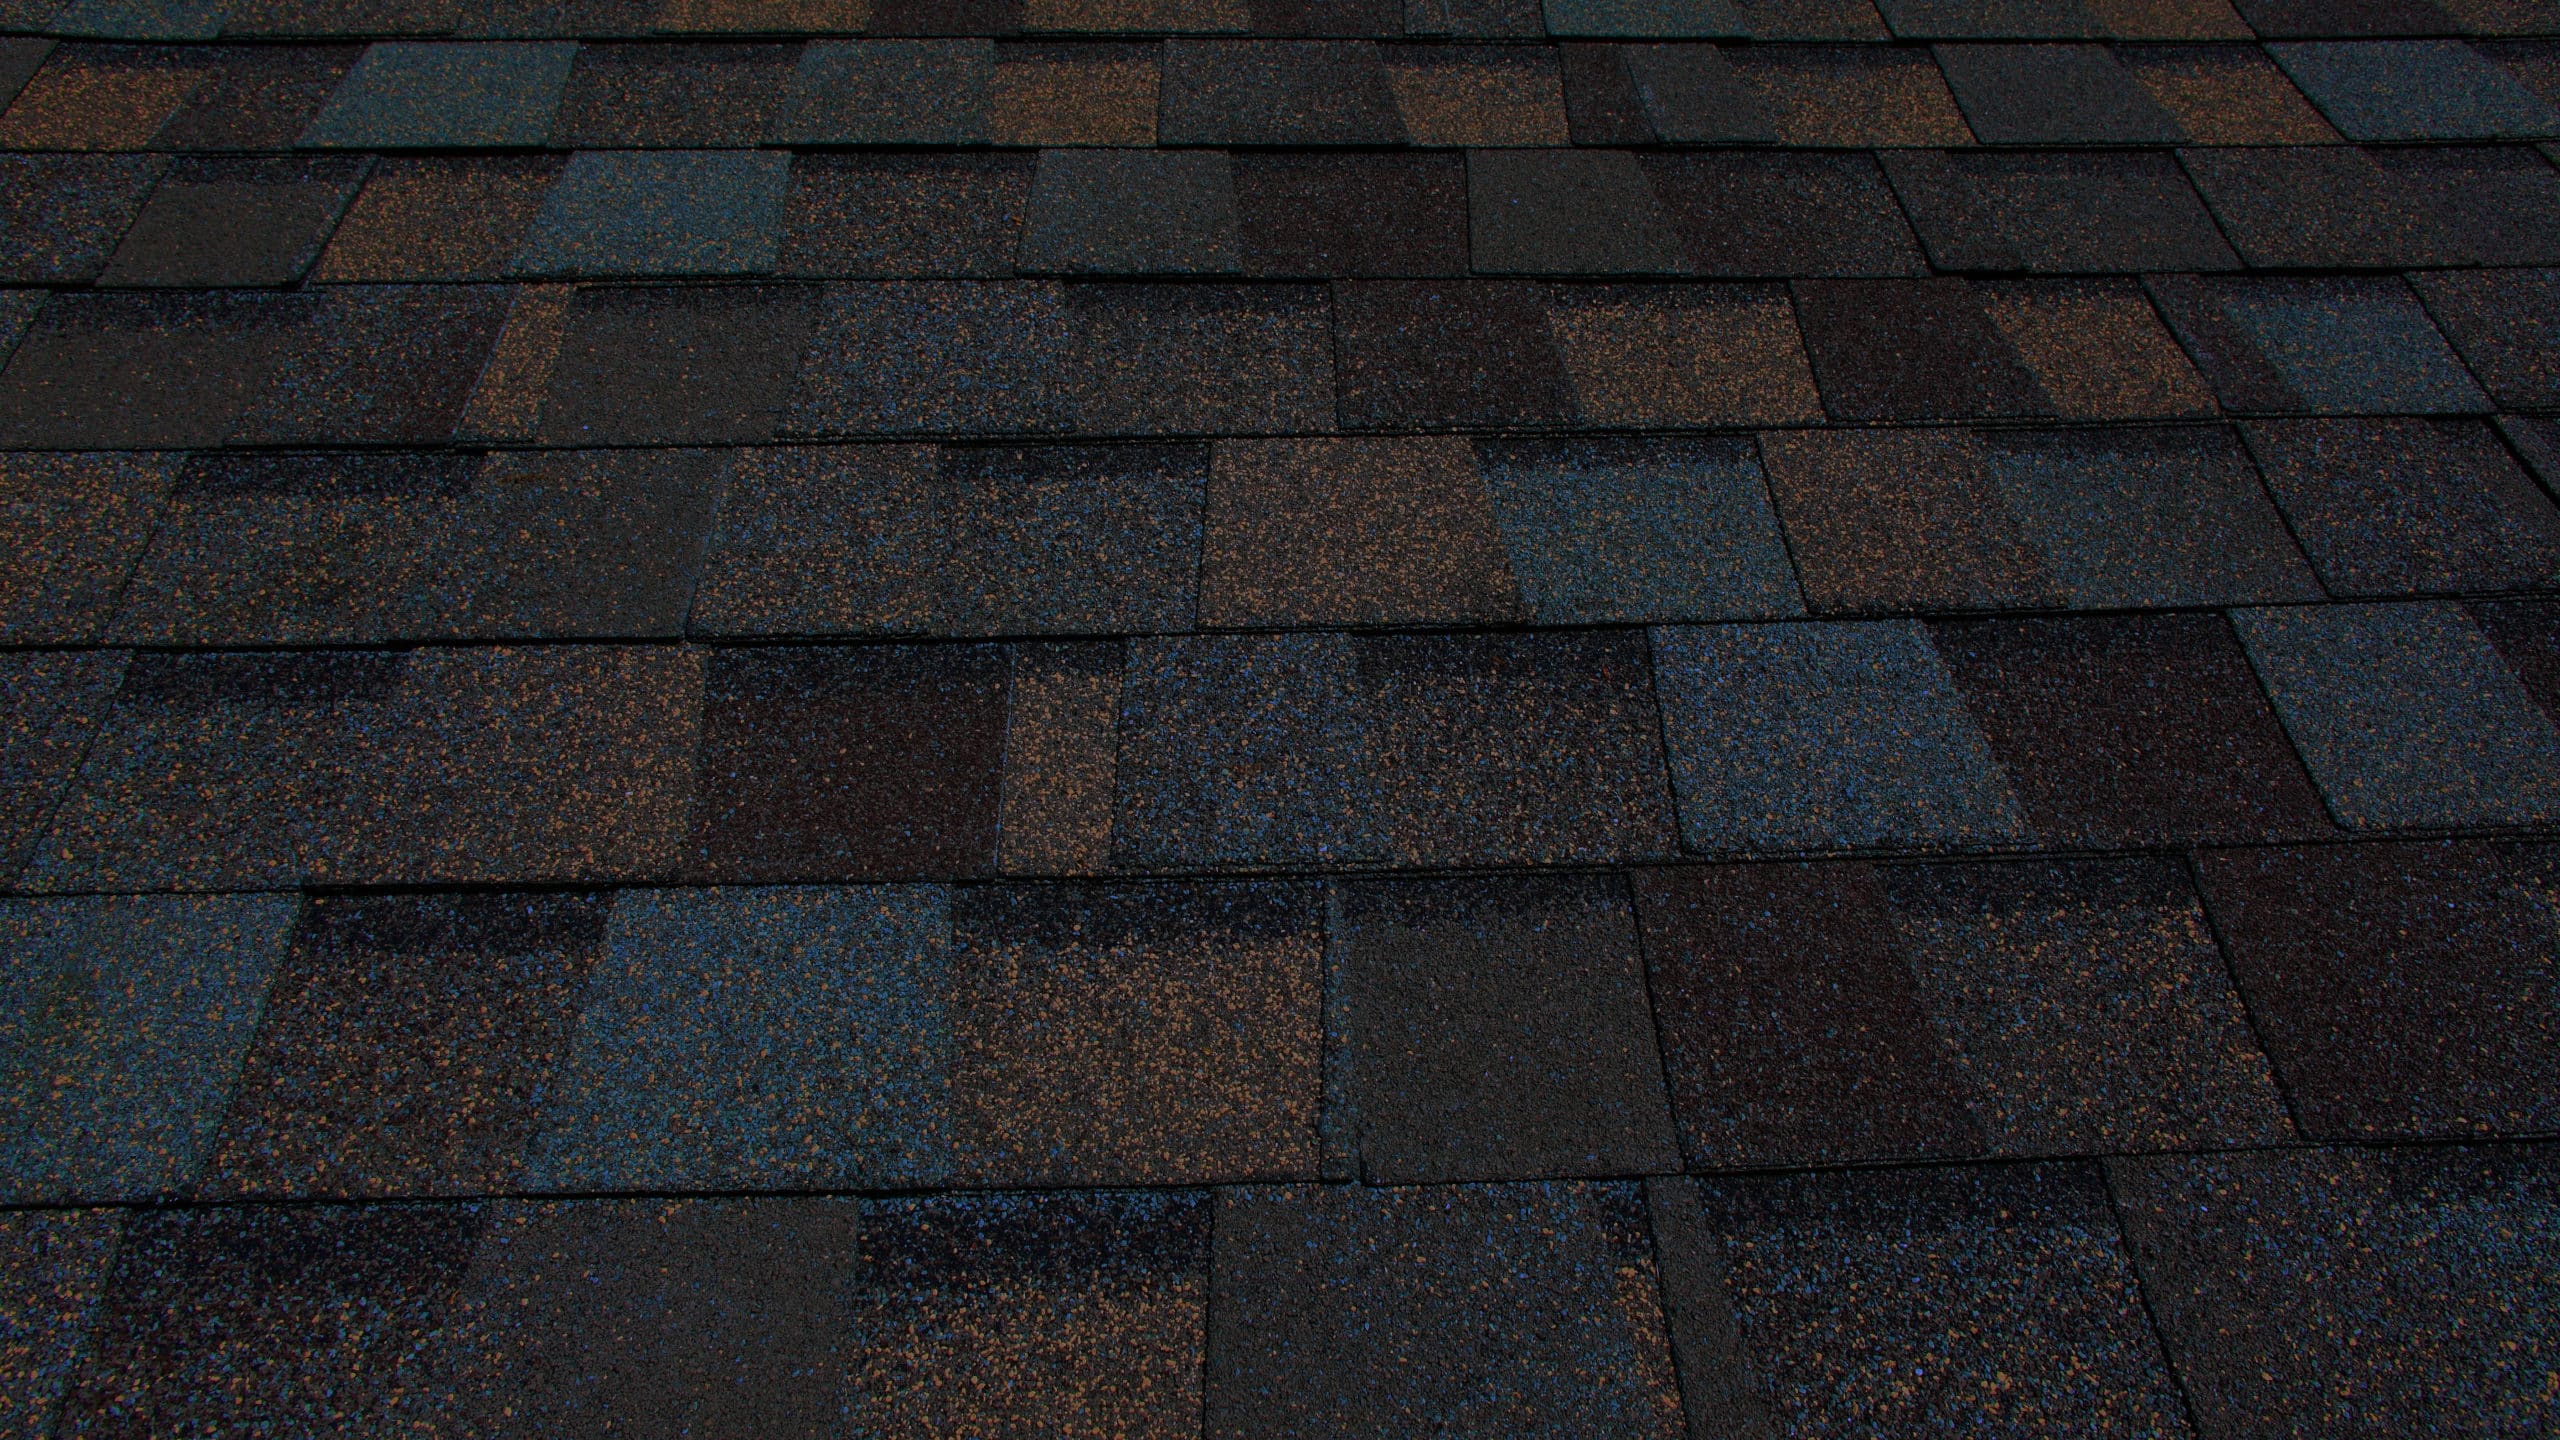 Shingles on a Roof